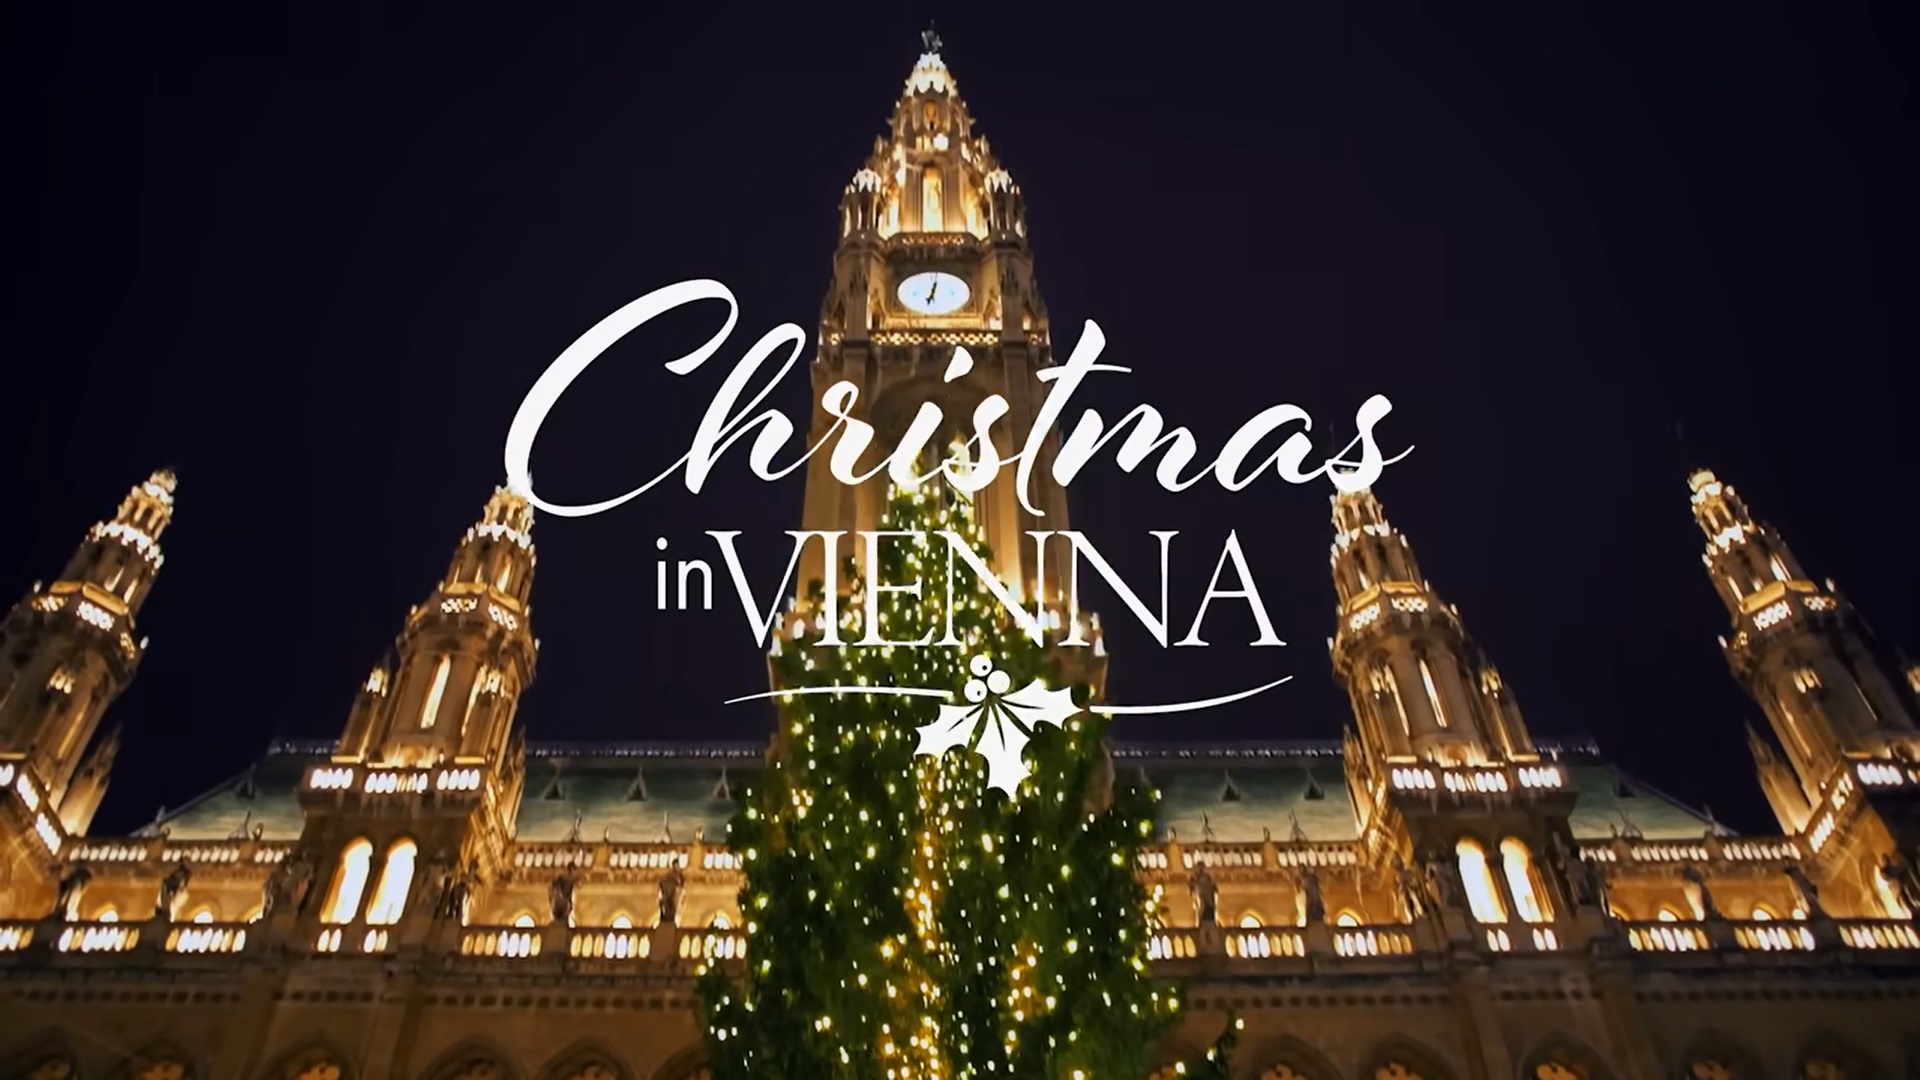 Christmas in Vienna